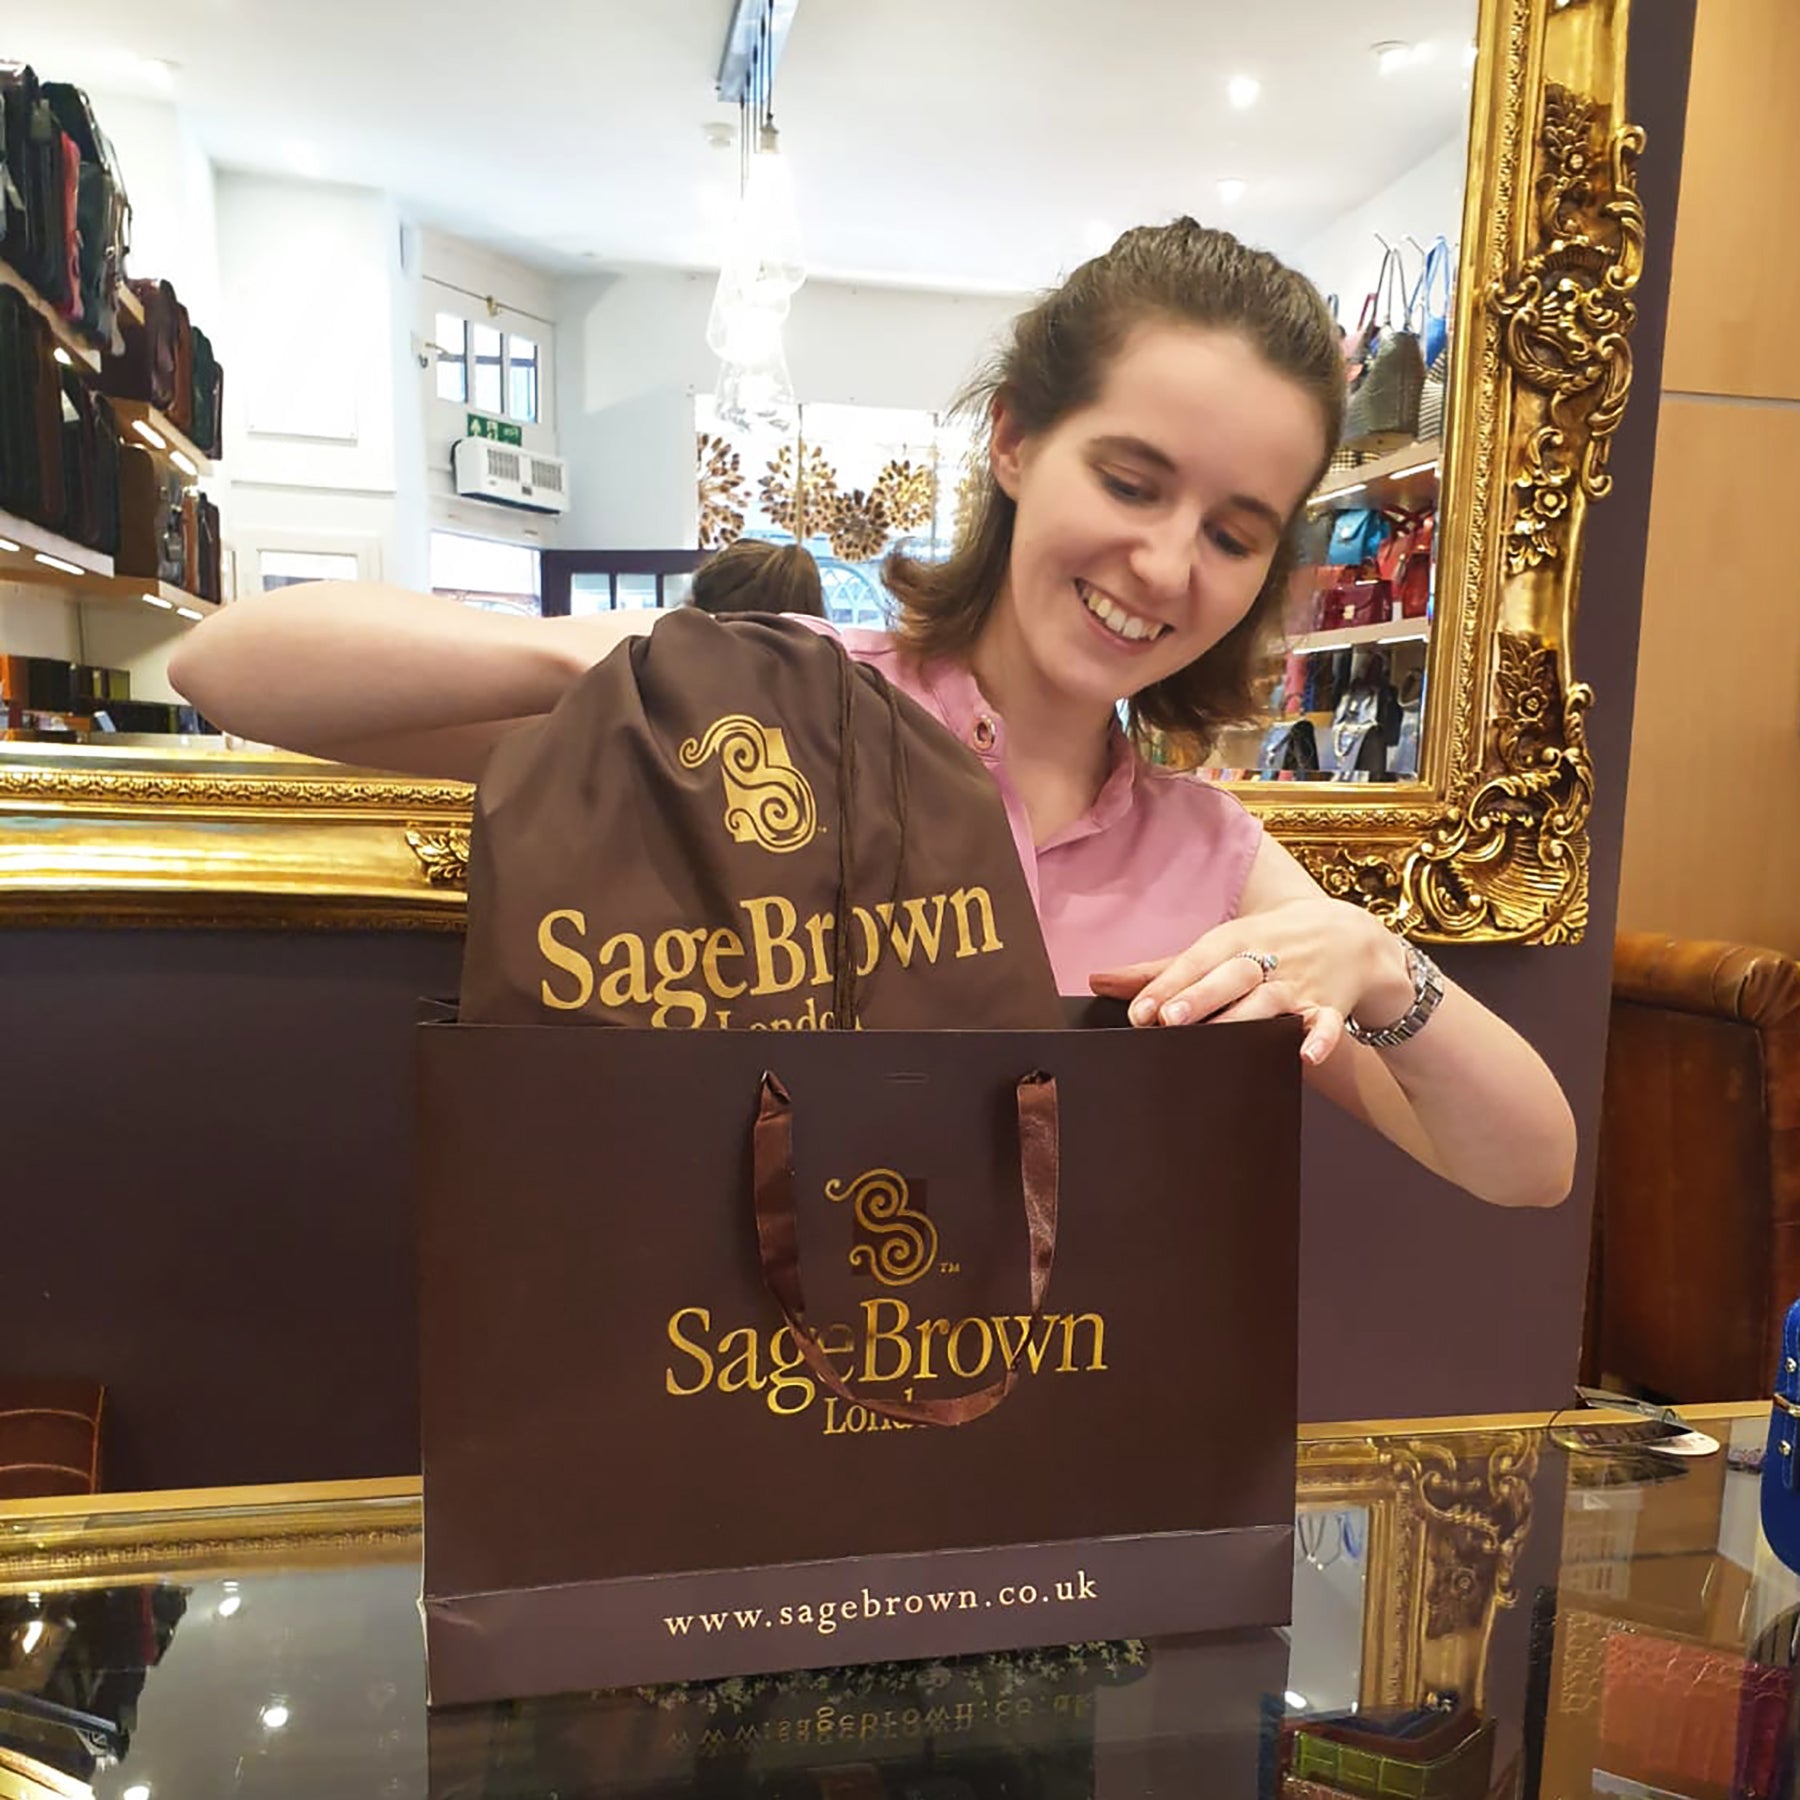 At SageBrown we pride ourselves on exceptional customer service. We strive to offer the highest level of service to every person, regardless of the circumstances.